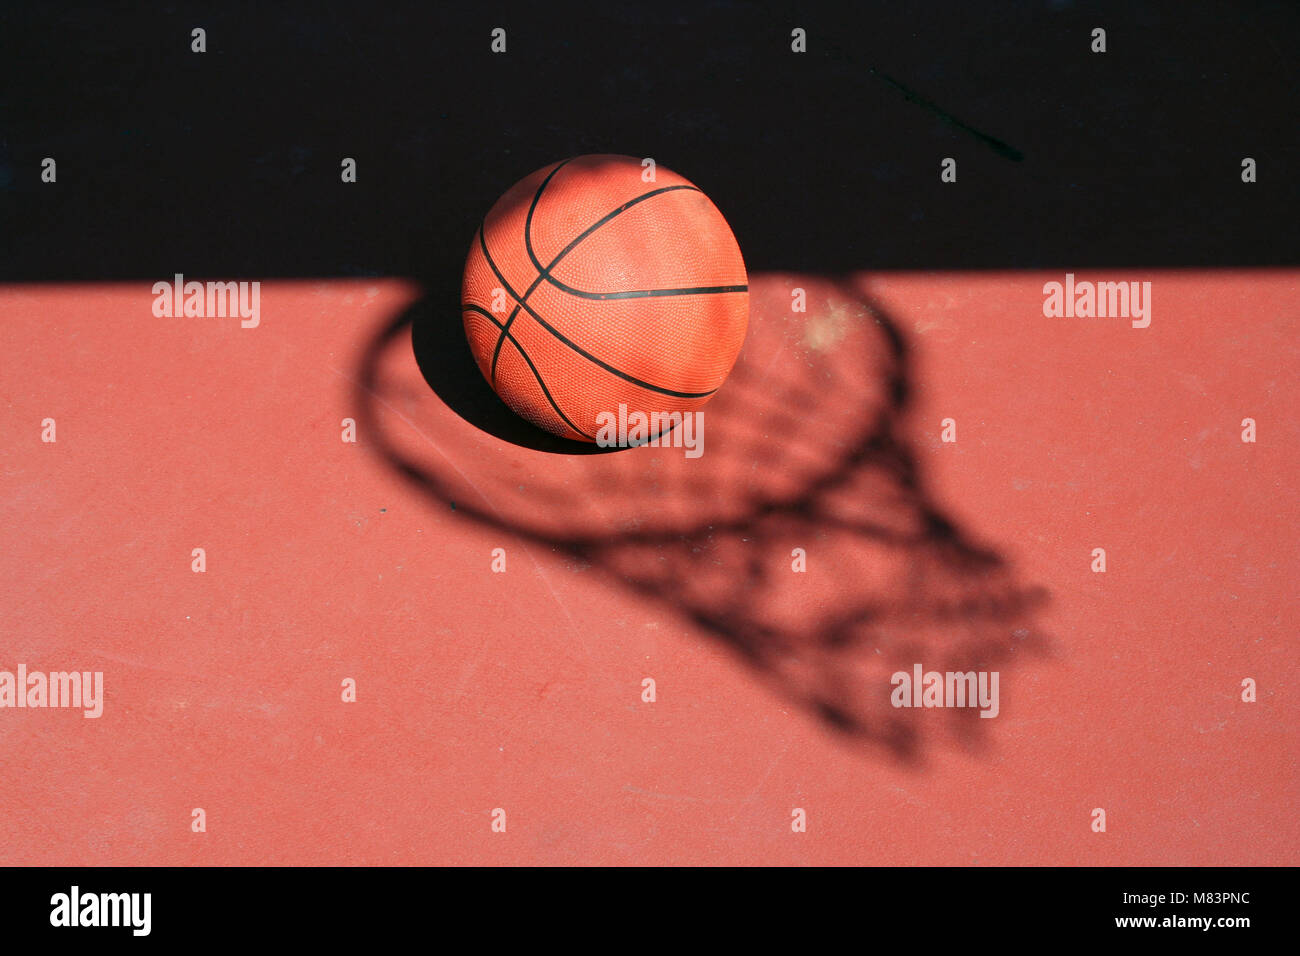 A Basketball and net shadow on a red court Stock Photo